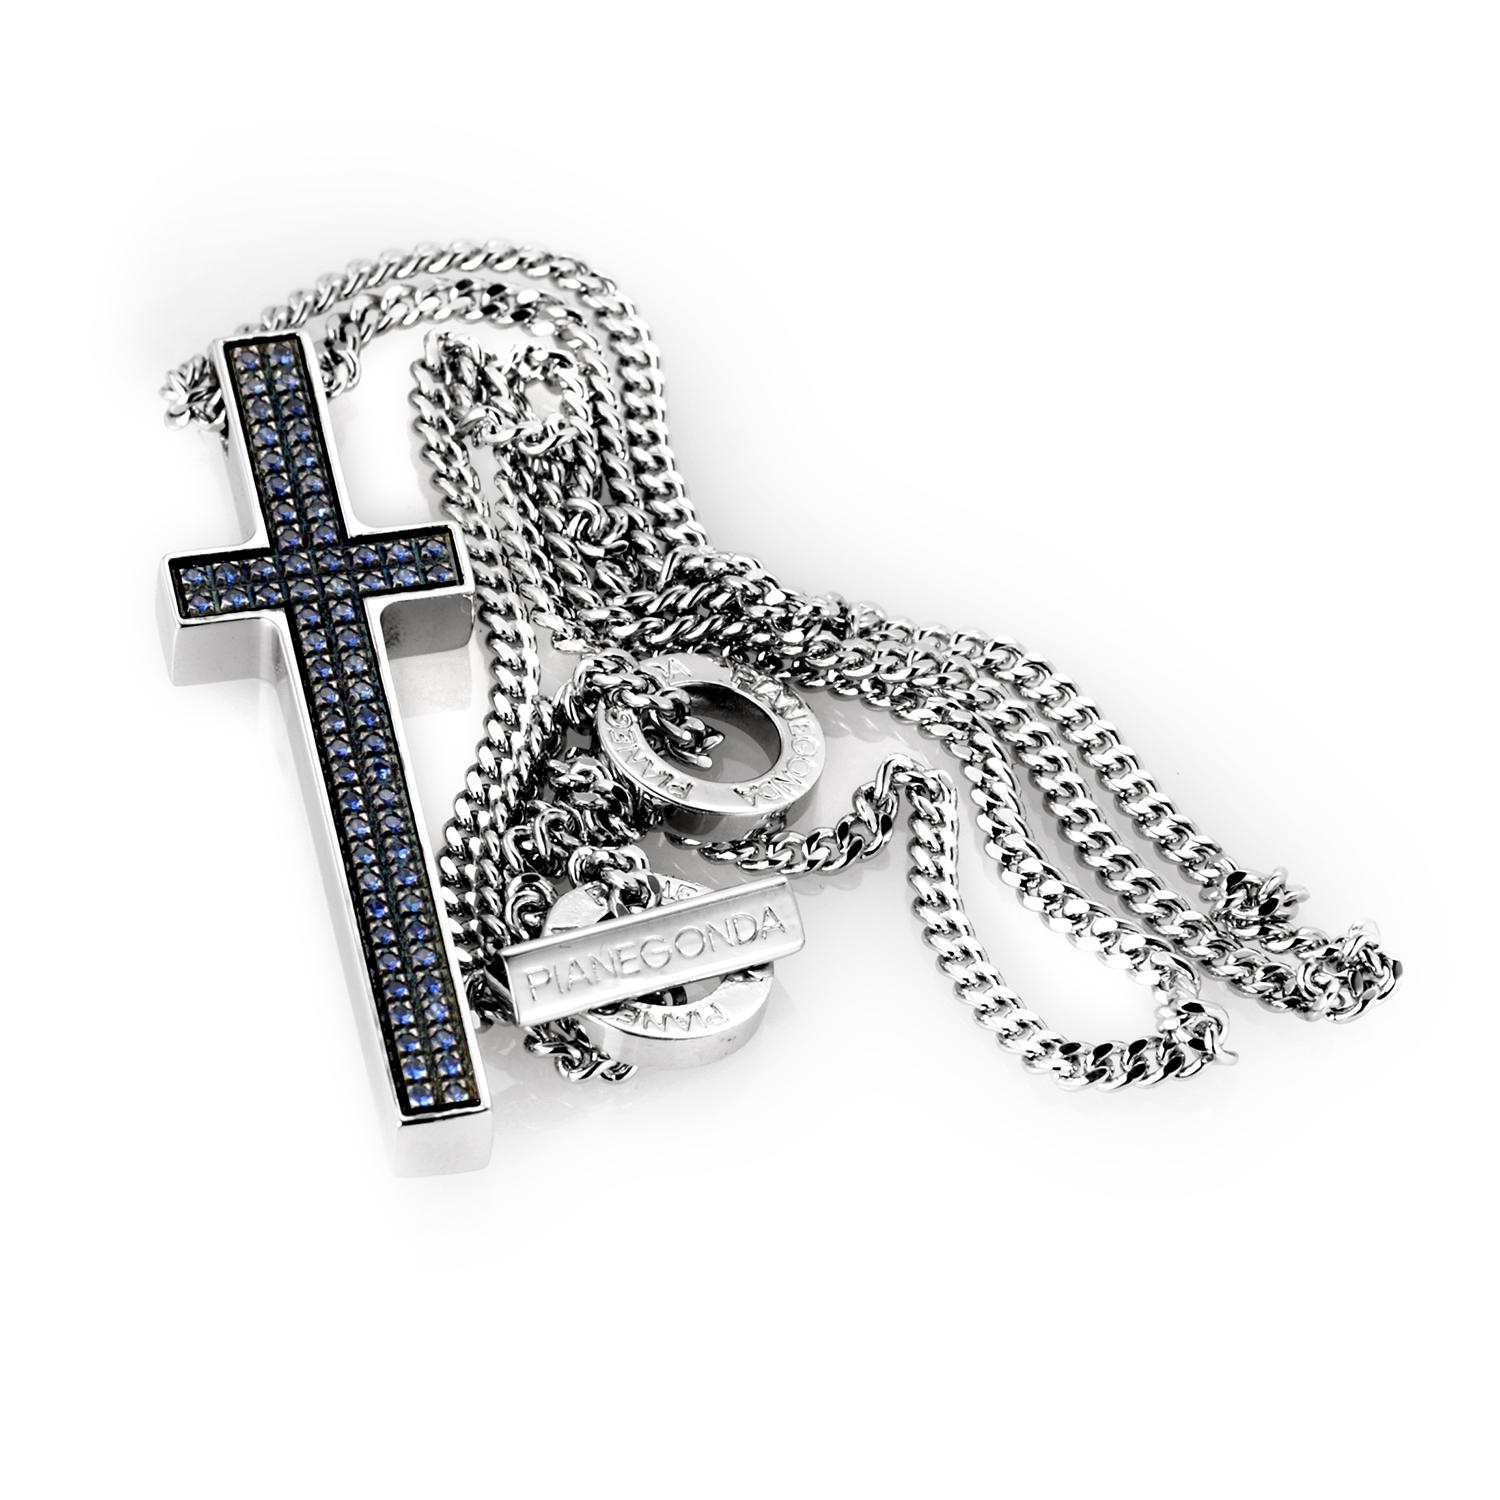 This pendant from Pianegonda is unique and an eye-catcher. It is made of silver and boasts a large hanging cross with a sapphire pave.
